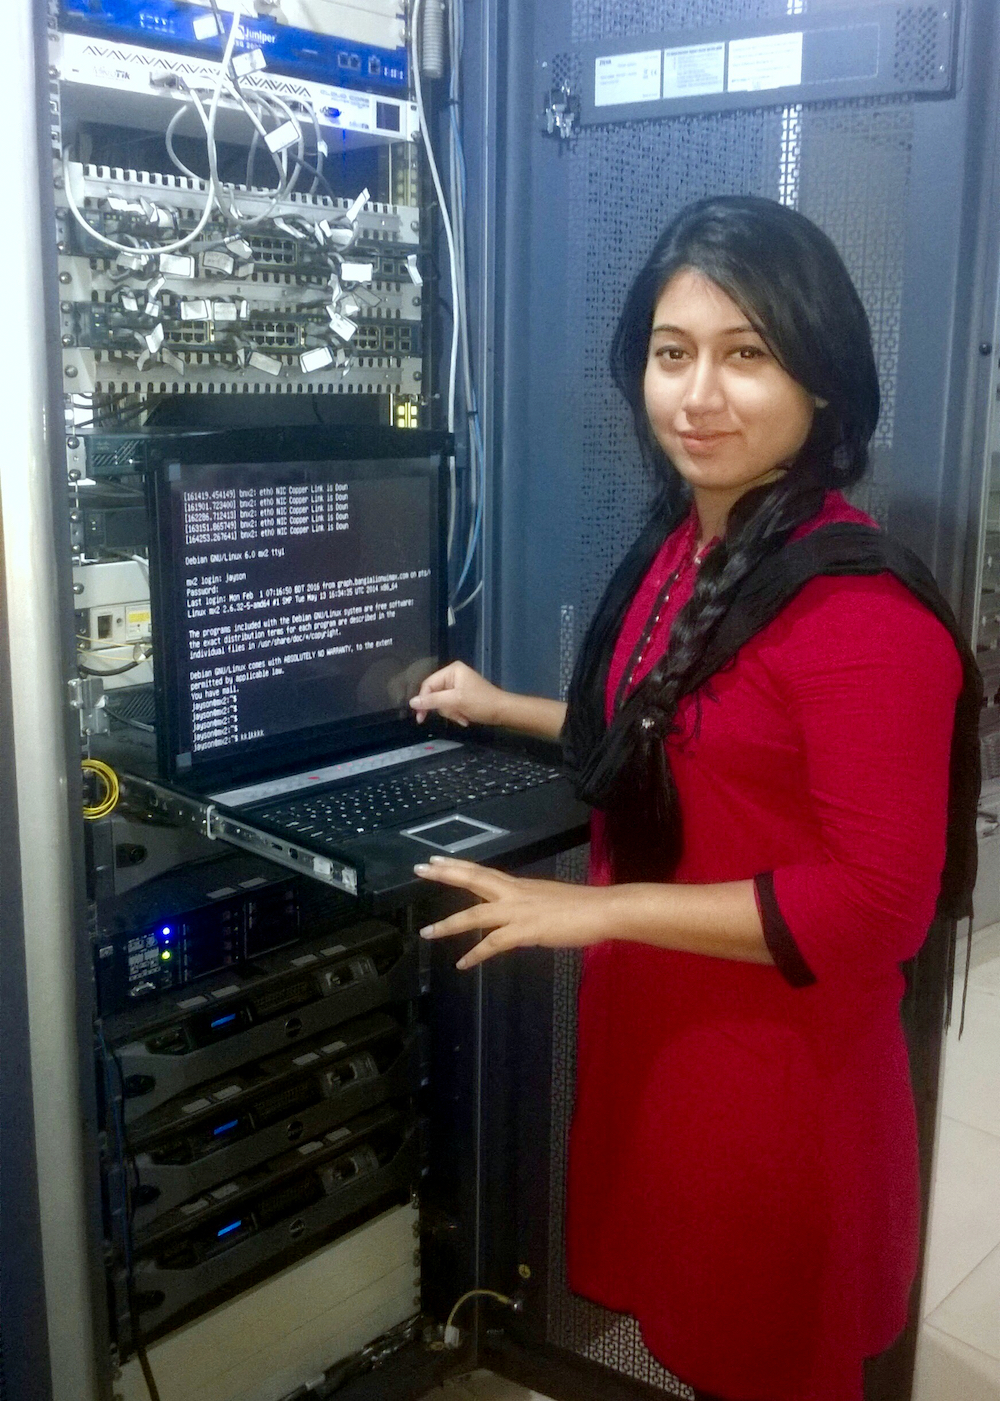 Shaila Sharmin has been working as a network engineer for over five years.